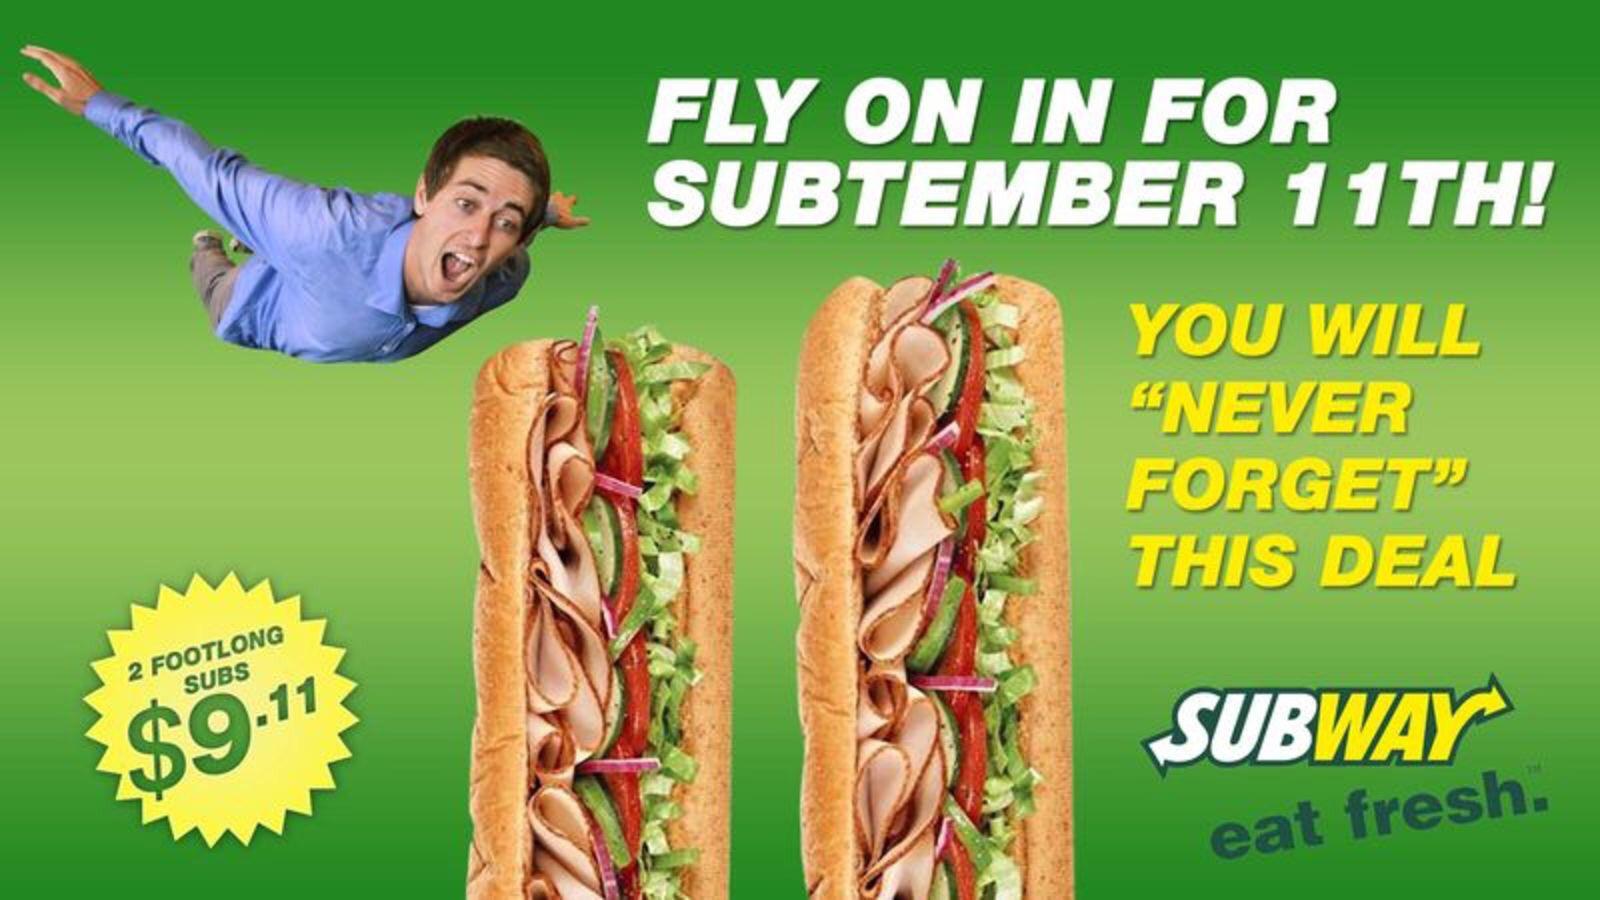 subway september 11 - Fly On In For Subtember 11TH! You Will "Never Forget" This Deal 2 Footlong Subs Subway eat fresh.